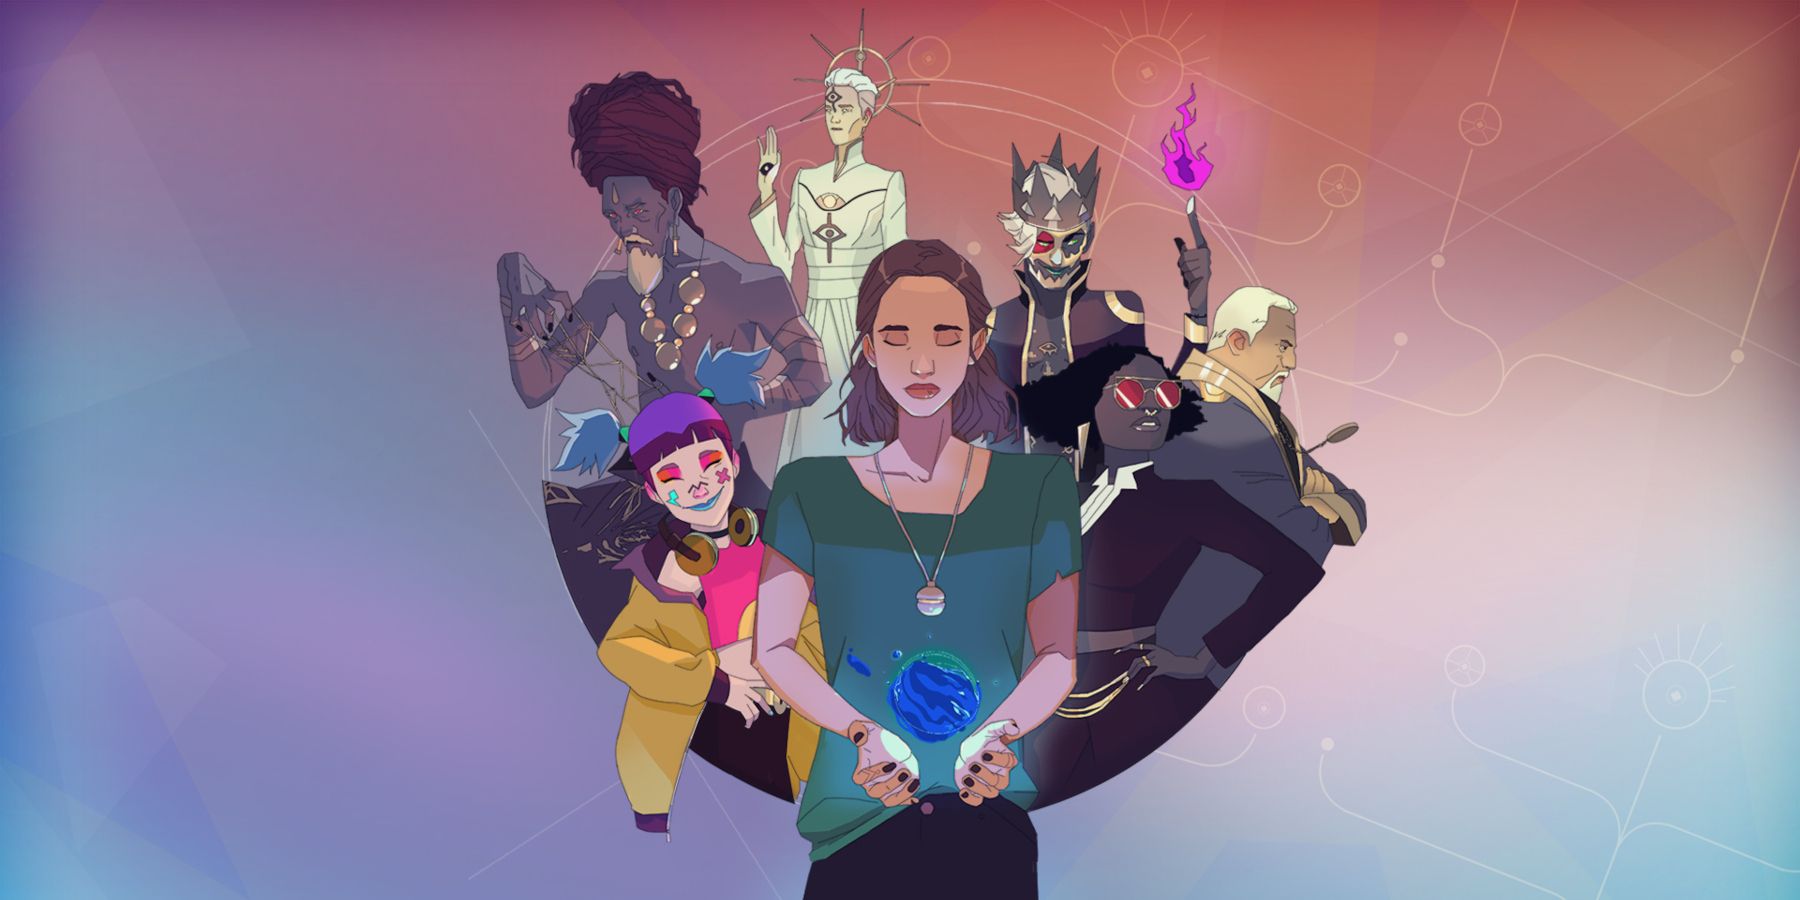 Artwork for the video game Harmony: The Fall Of Reverie. A woman wearing a necklace is cradling a floating blue orb. She is surrounded by people in extravagant outfits.